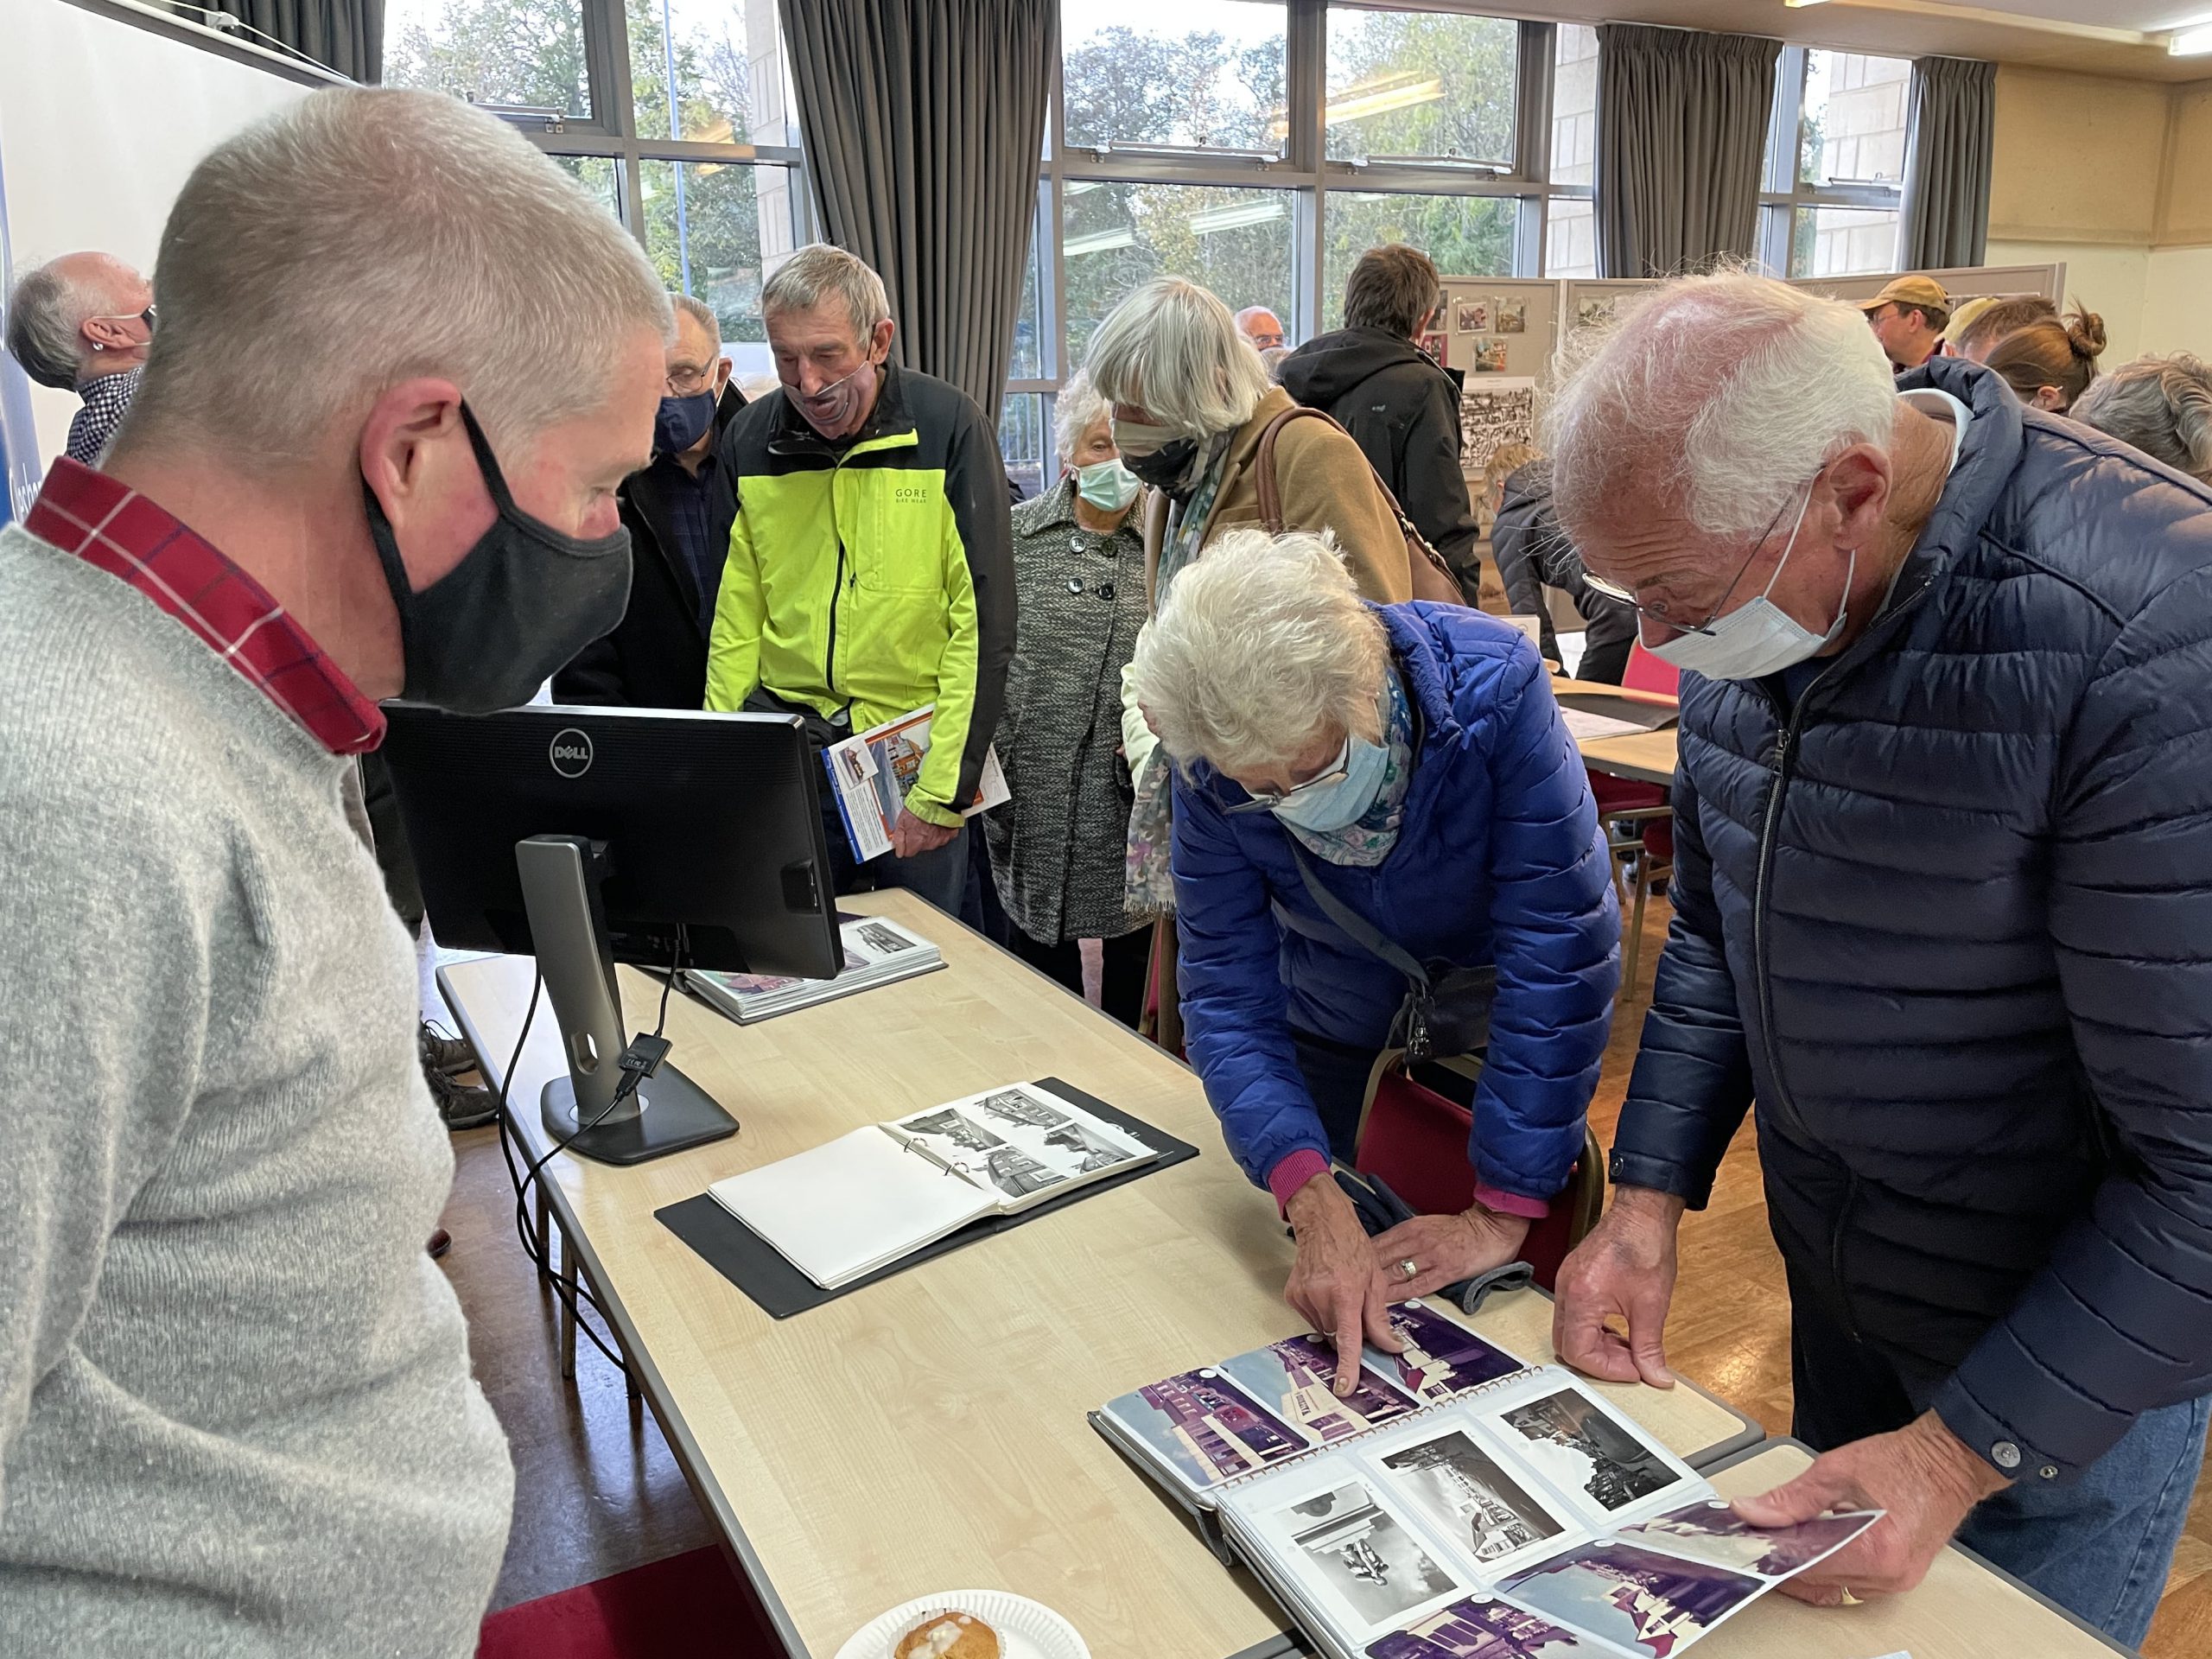 People viewing a book of images at an event